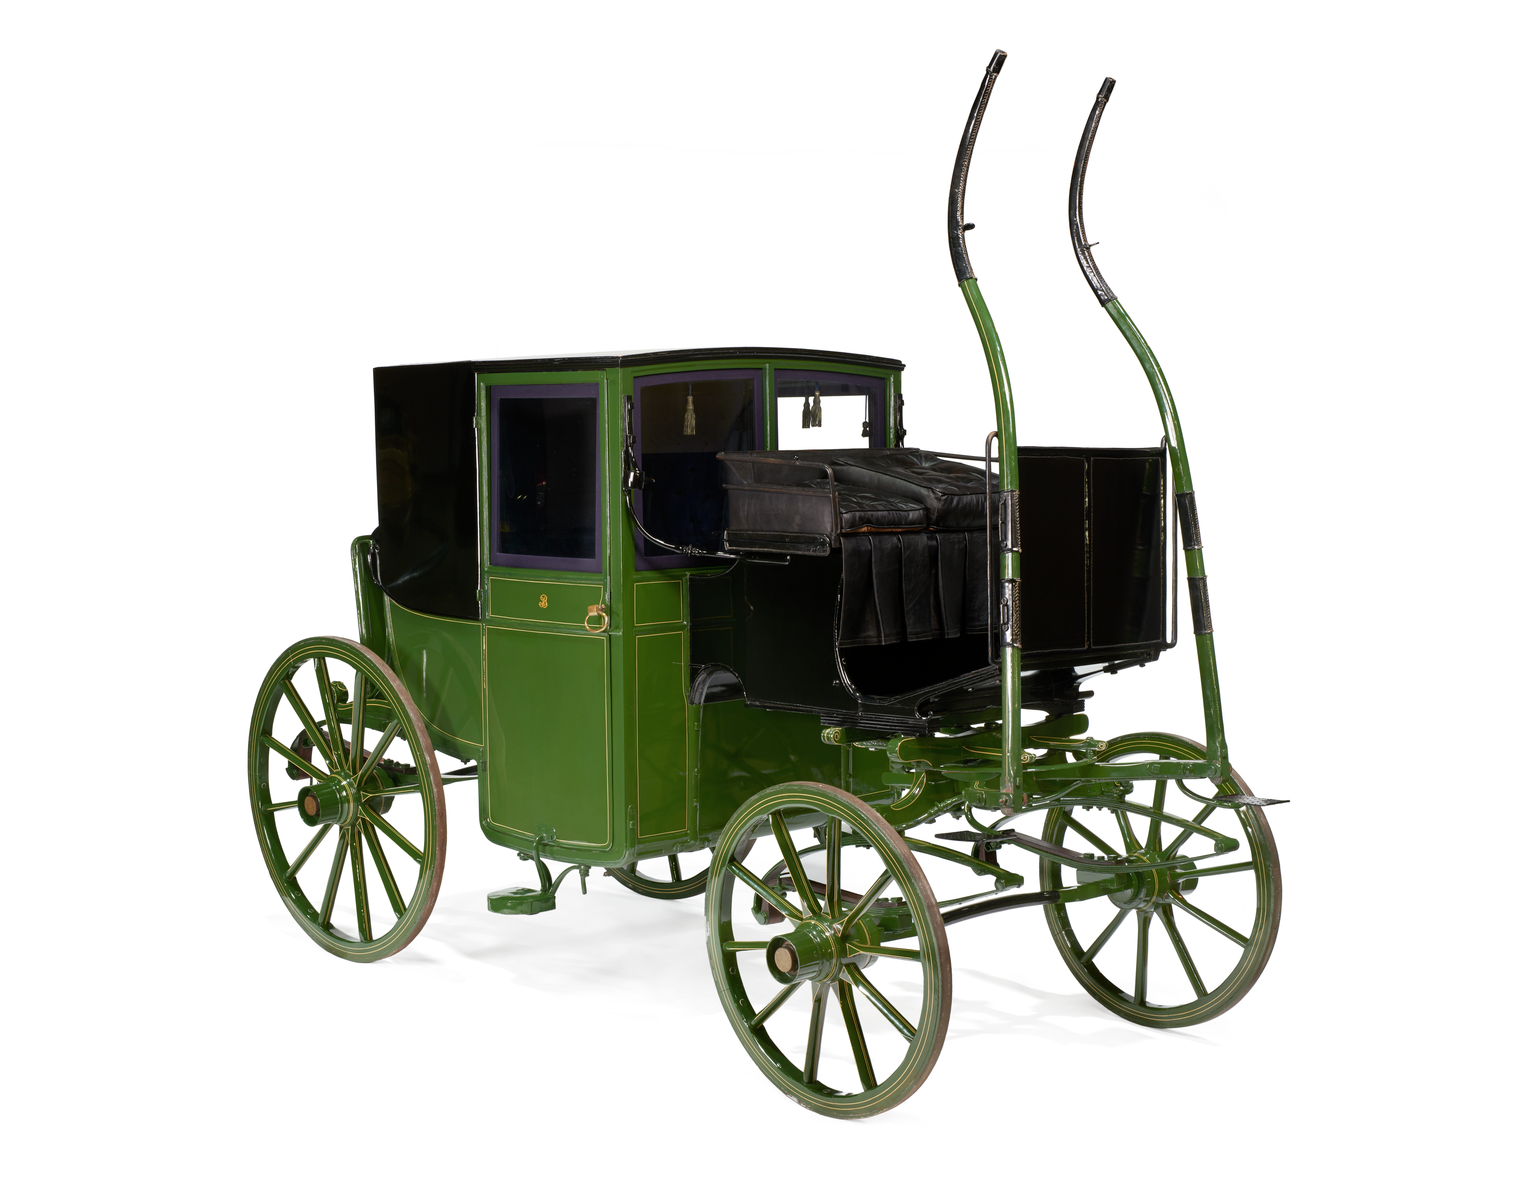 The Original Brougham Carriage. Image: Worshipful Company of Coachmakers & Coach Harness Makers of London